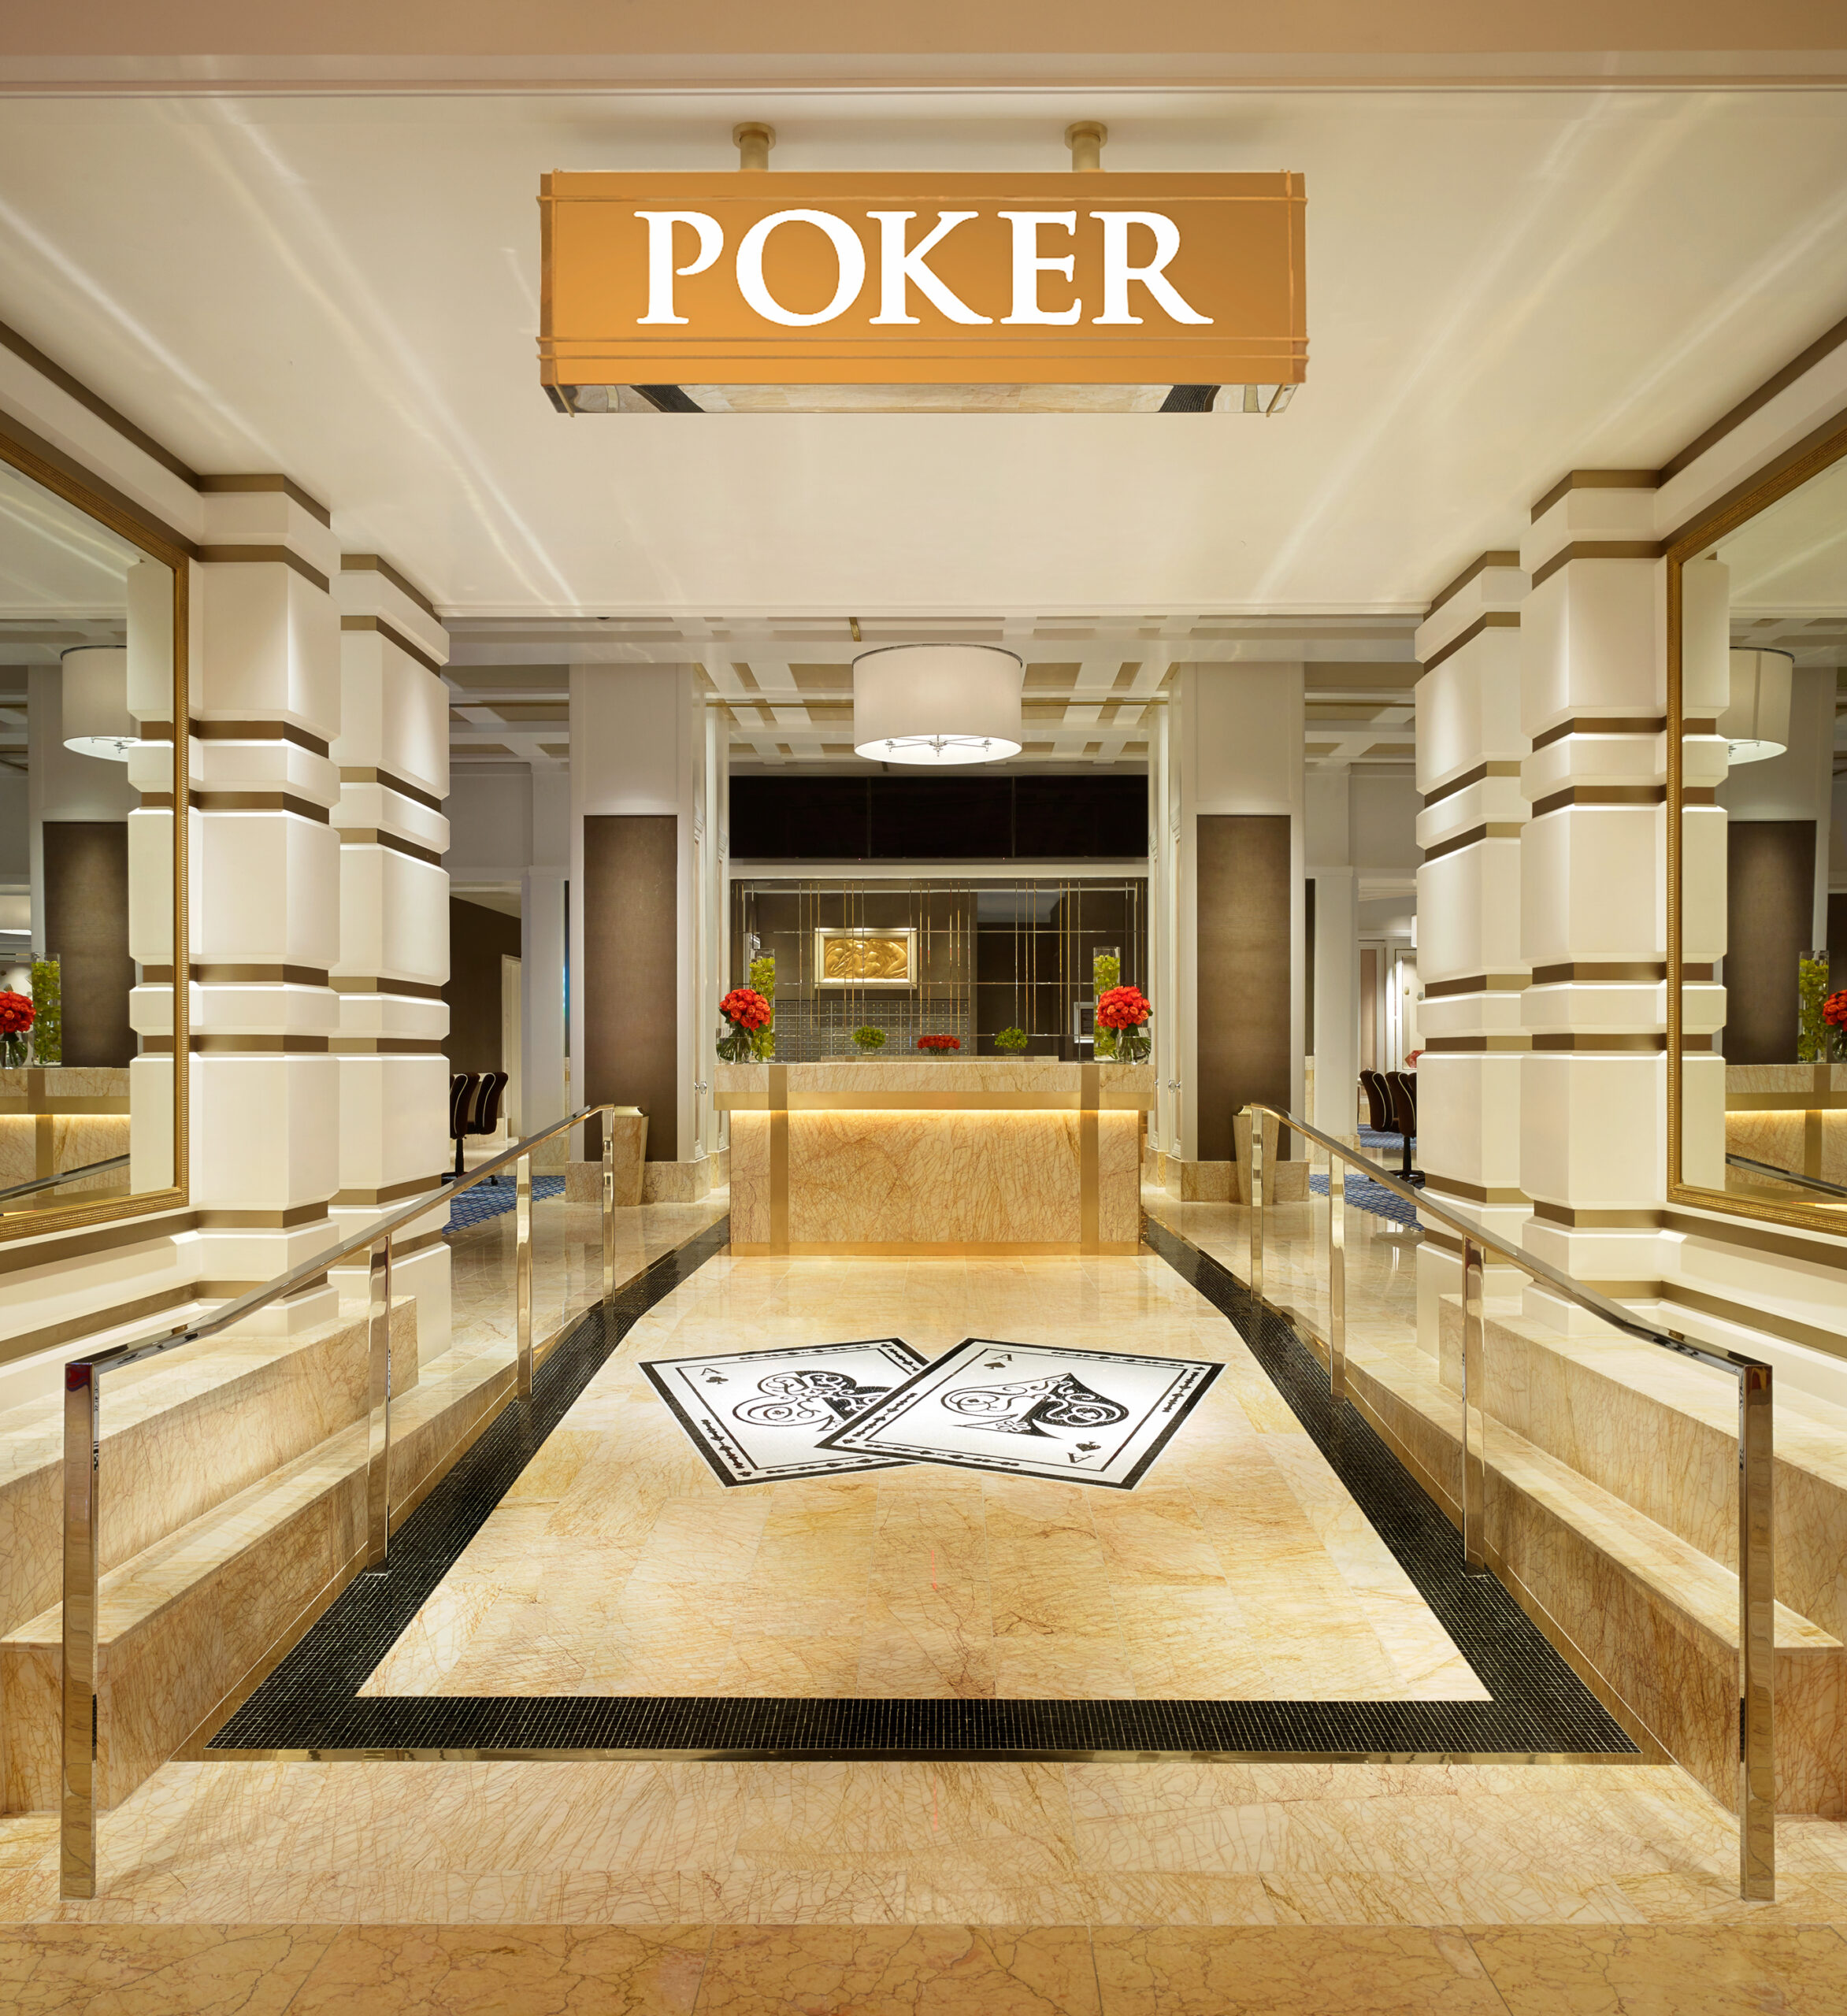 New Wynn Poker Room Opens at the Encore, Worth Some Confusion to Find